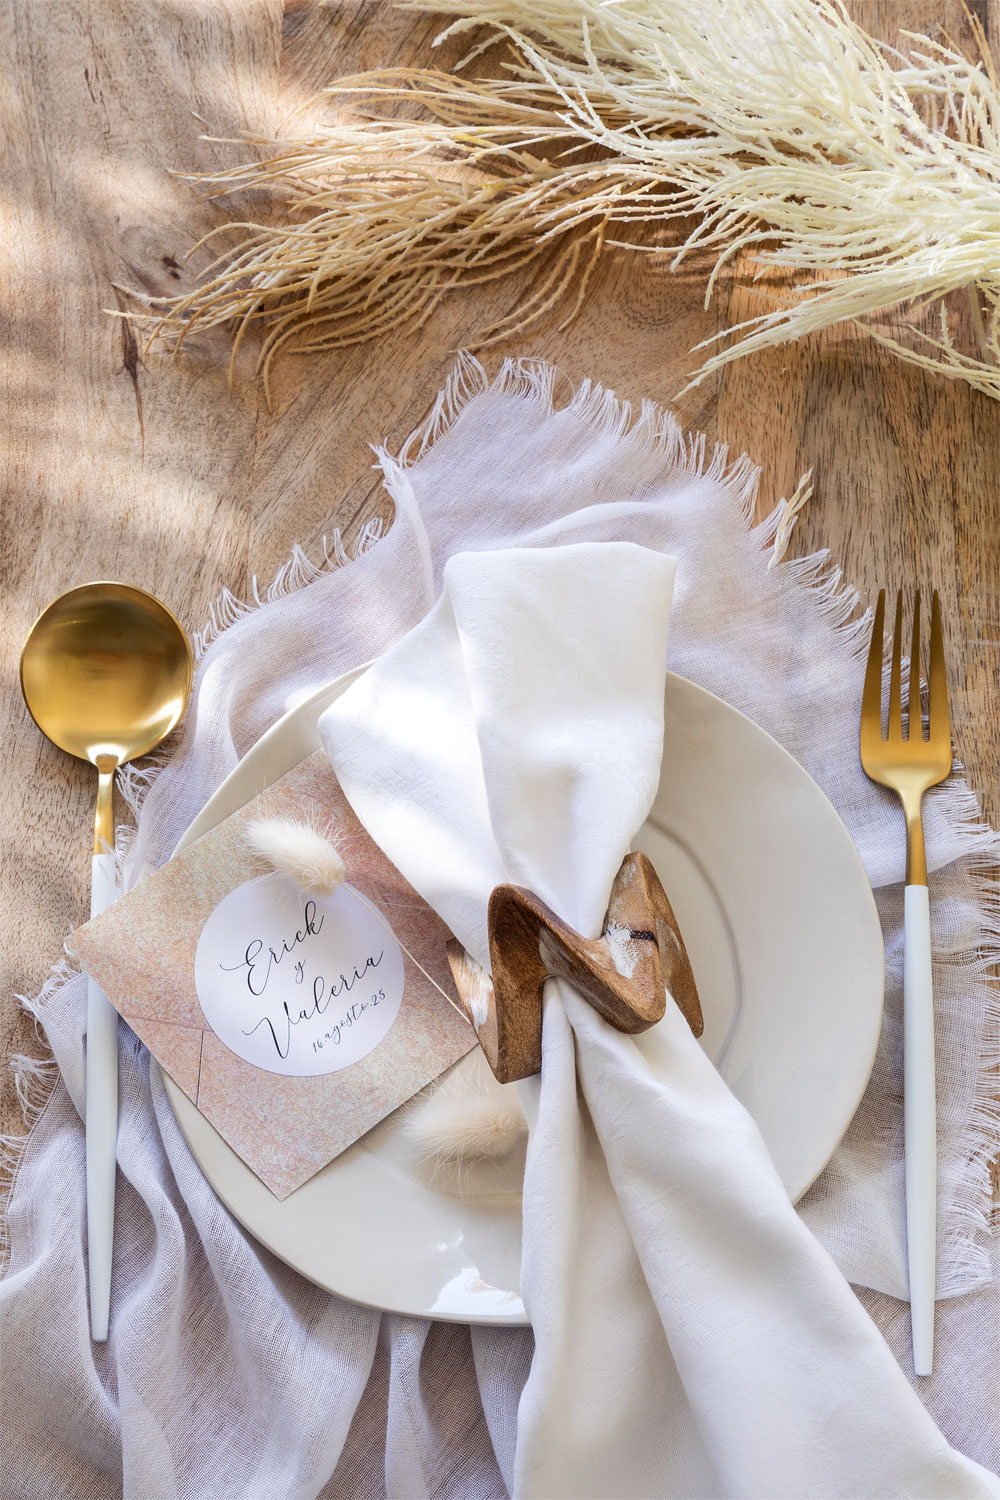 Wooden Napkin Rings - Shop online and save up to 6%, UK